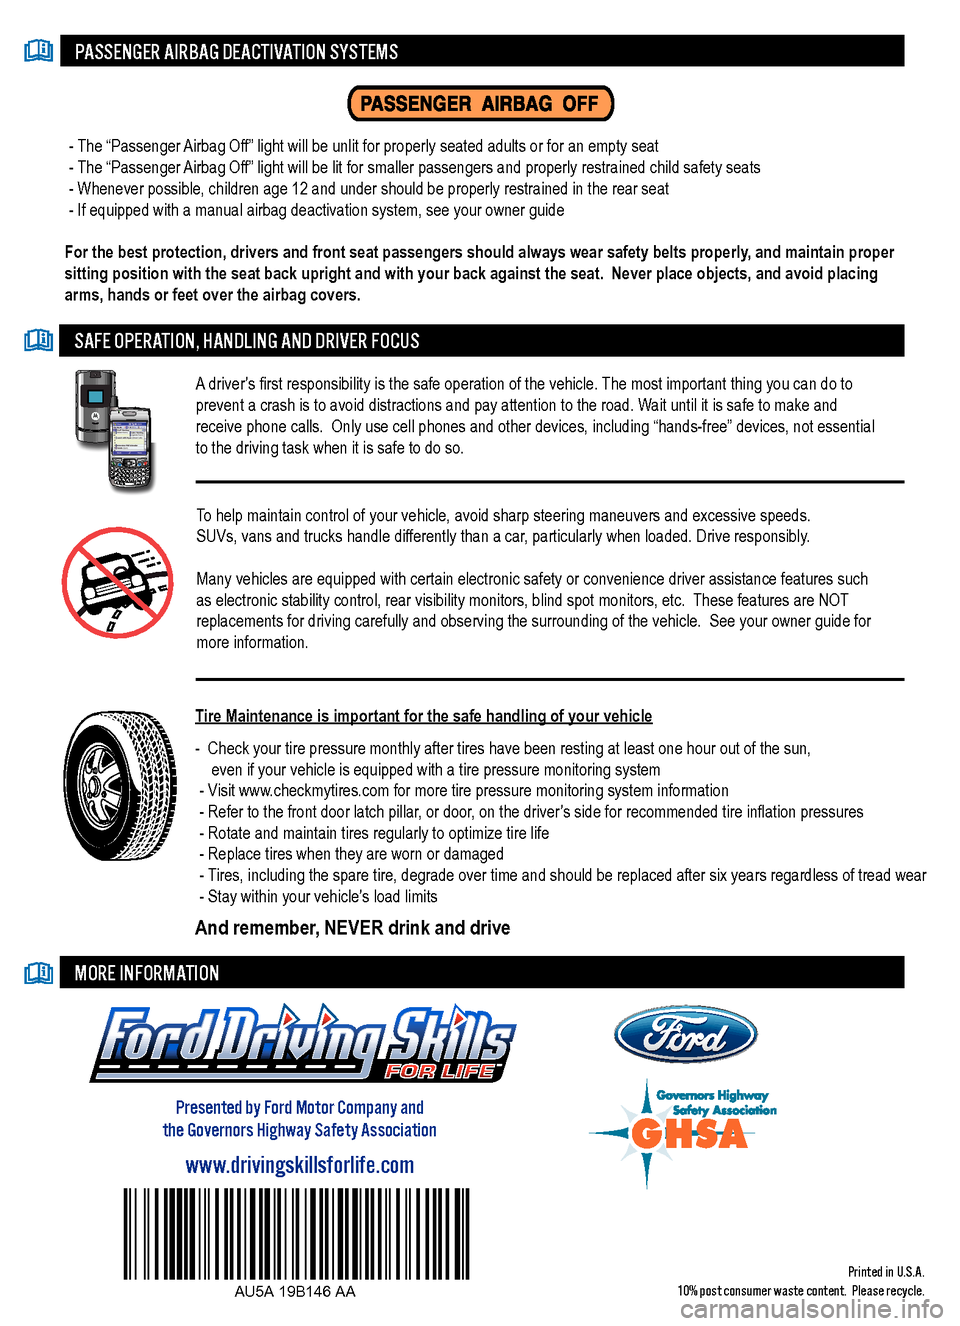 FORD SUPER DUTY 2010 2.G Safety Advice Card  - The “Passenger Airbag Off” light will be unlit for properly seated adults or for an empty sea\
t
 - The “Passenger Airbag Off” light will be lit for smaller passengers and properly restrain